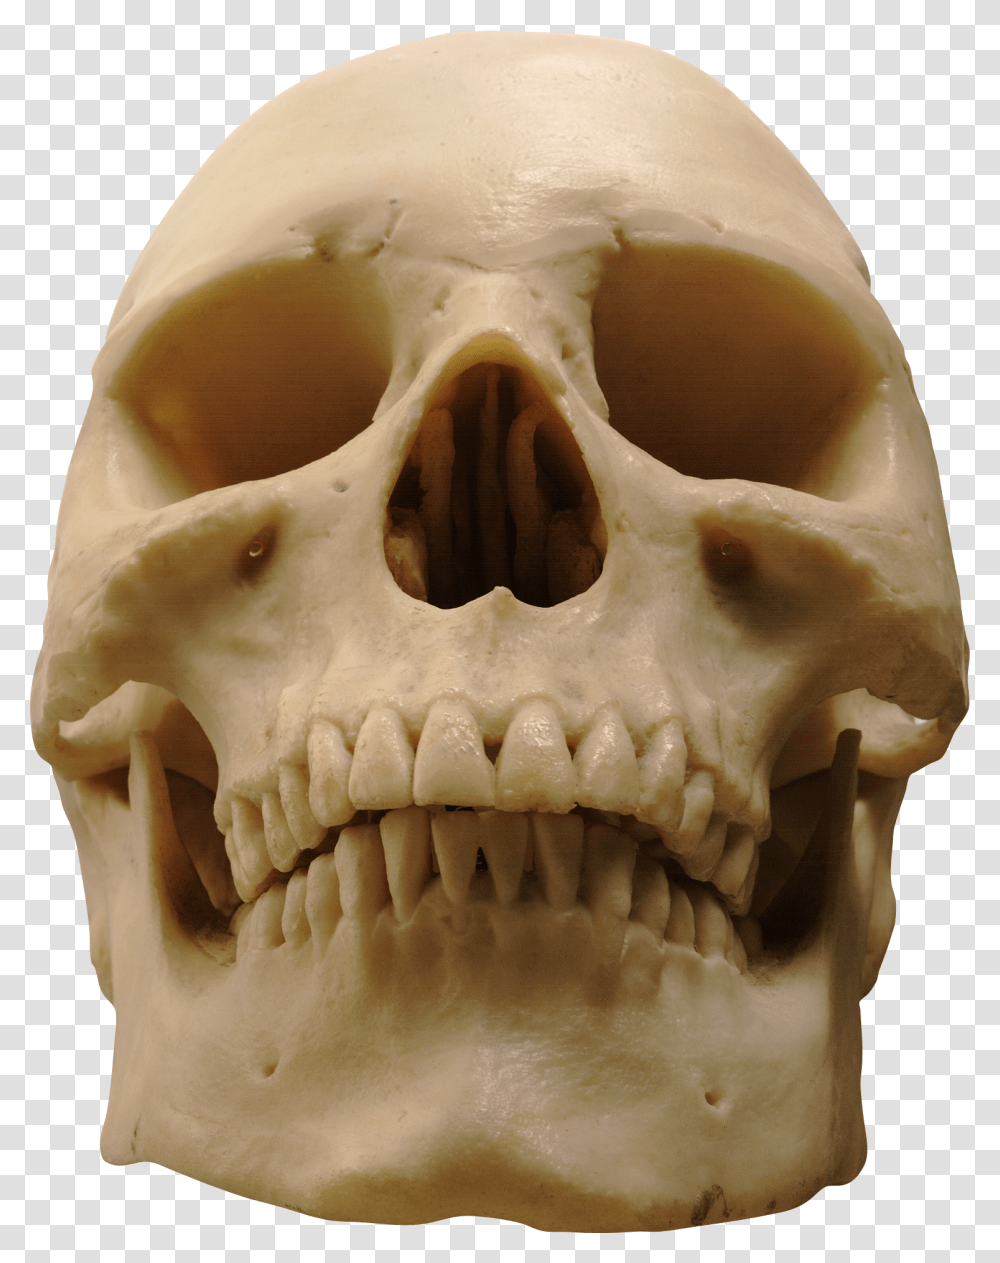 Pngs Skull, Jaw, Teeth, Mouth, Lip Transparent Png